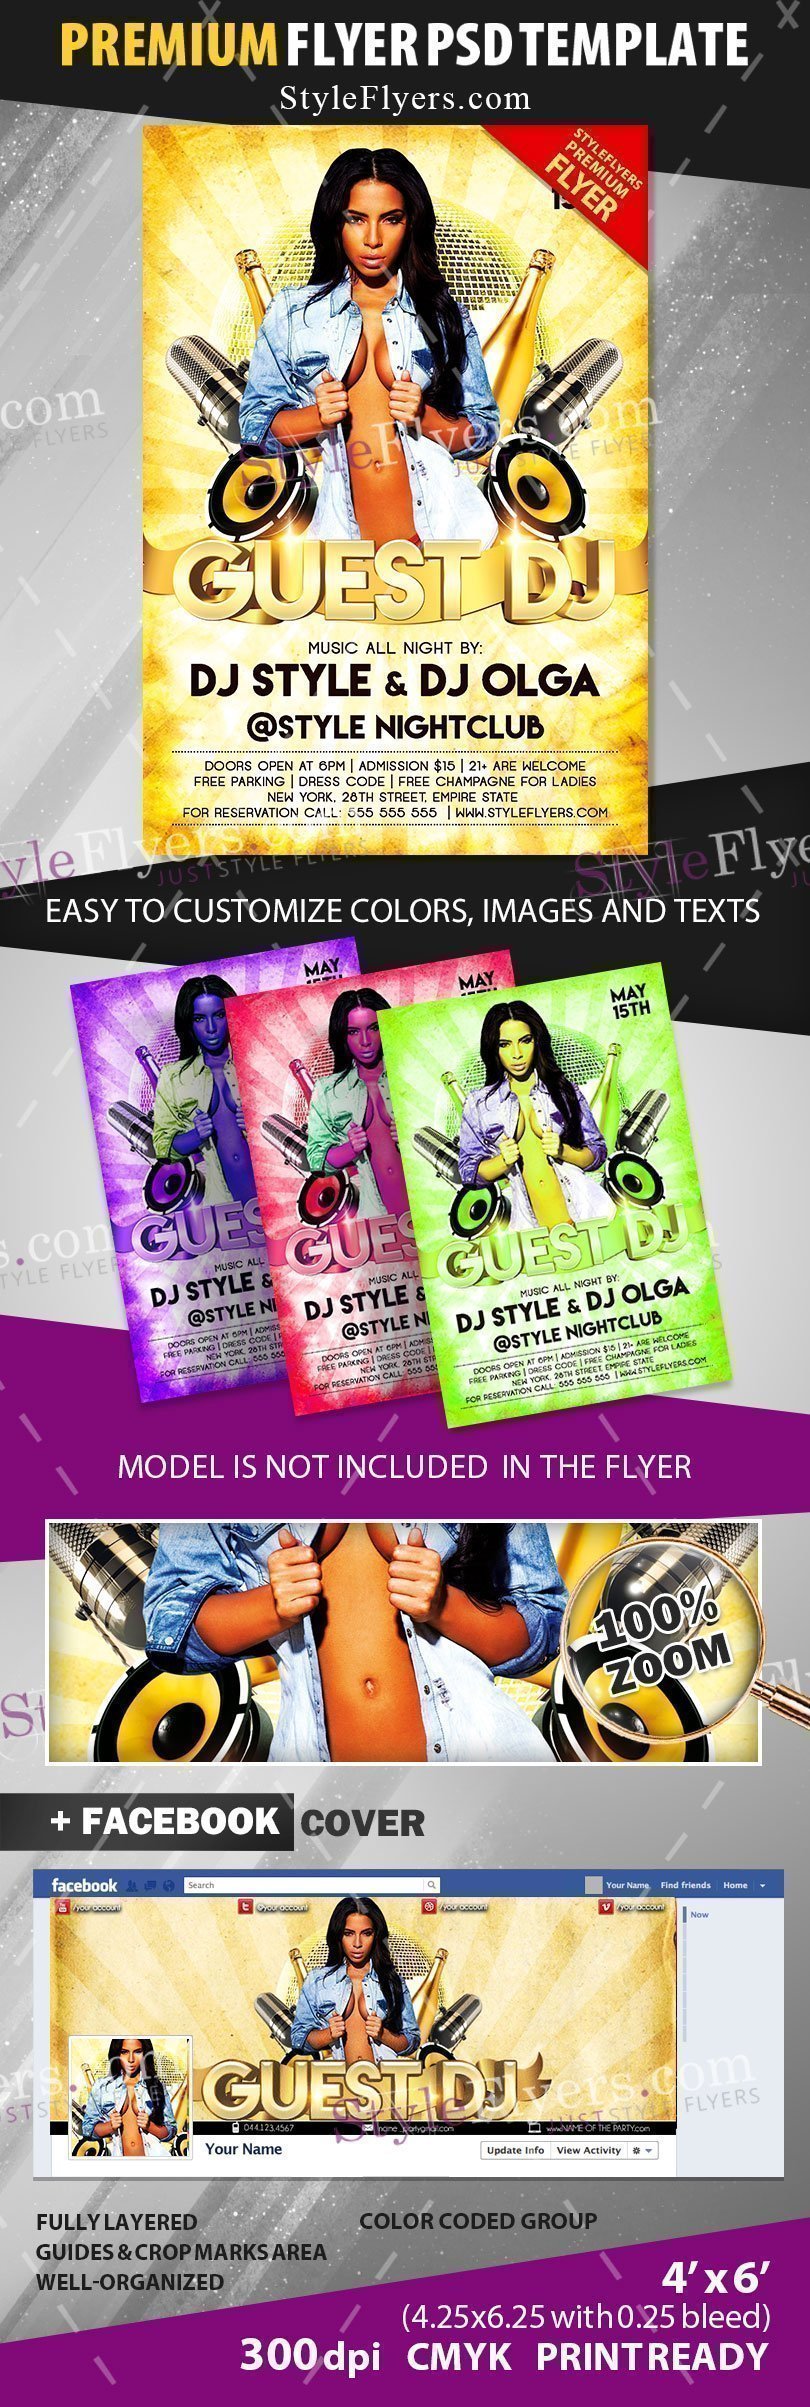 preview_luxury_night_Flyer_premium_template